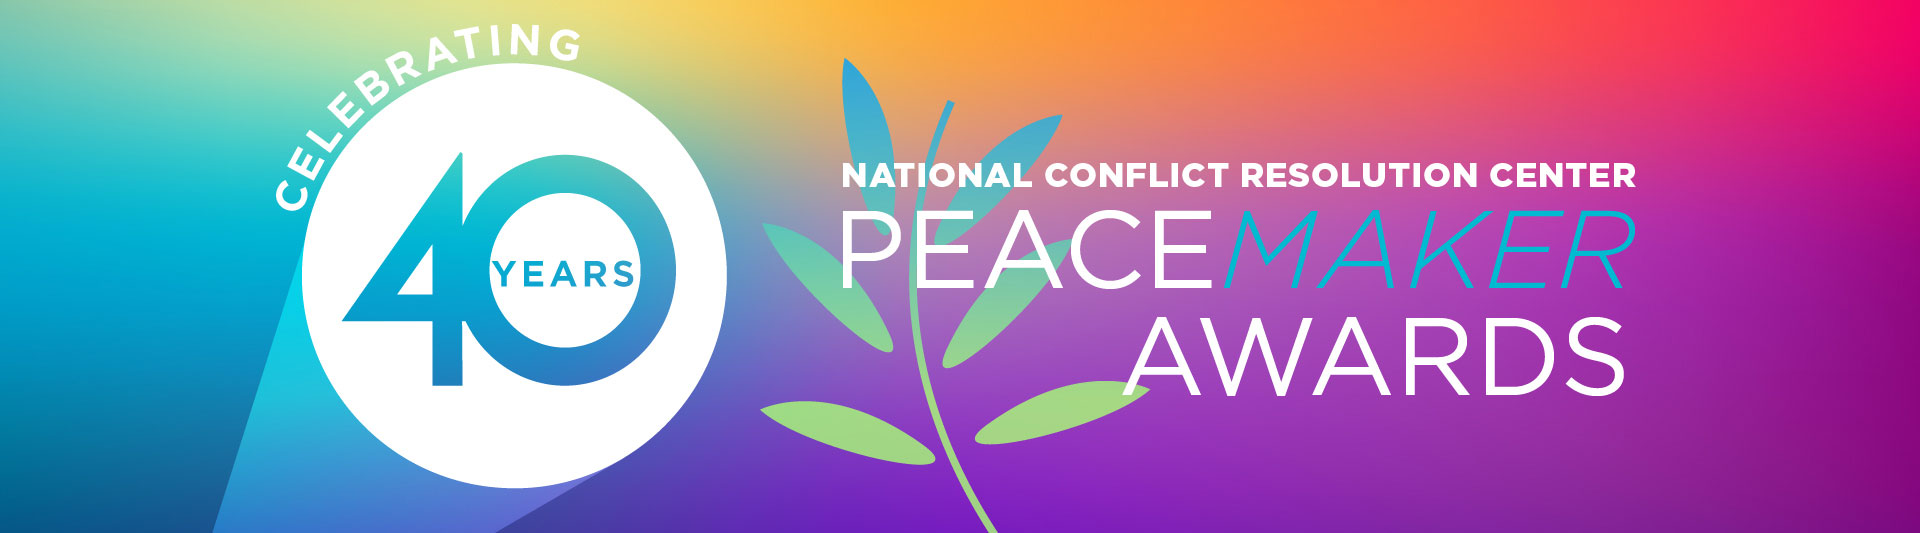 National Conflict Resolution Center Peace Maker Awards